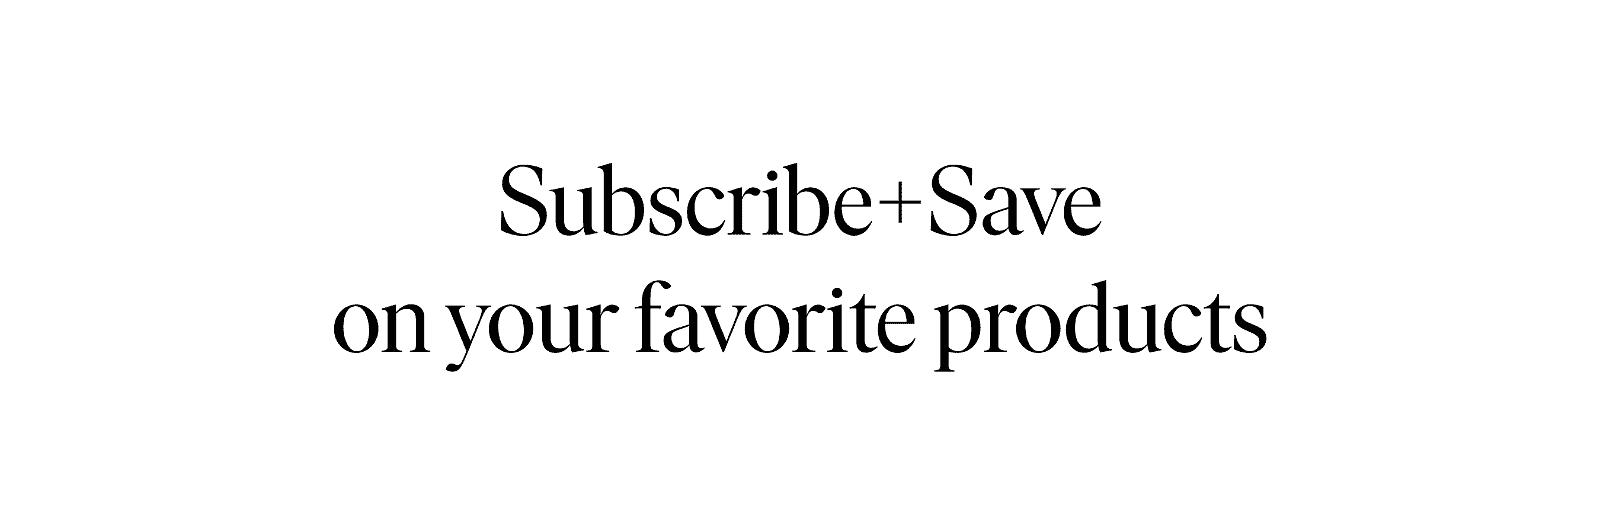 Subscribe + Save on your favorite products